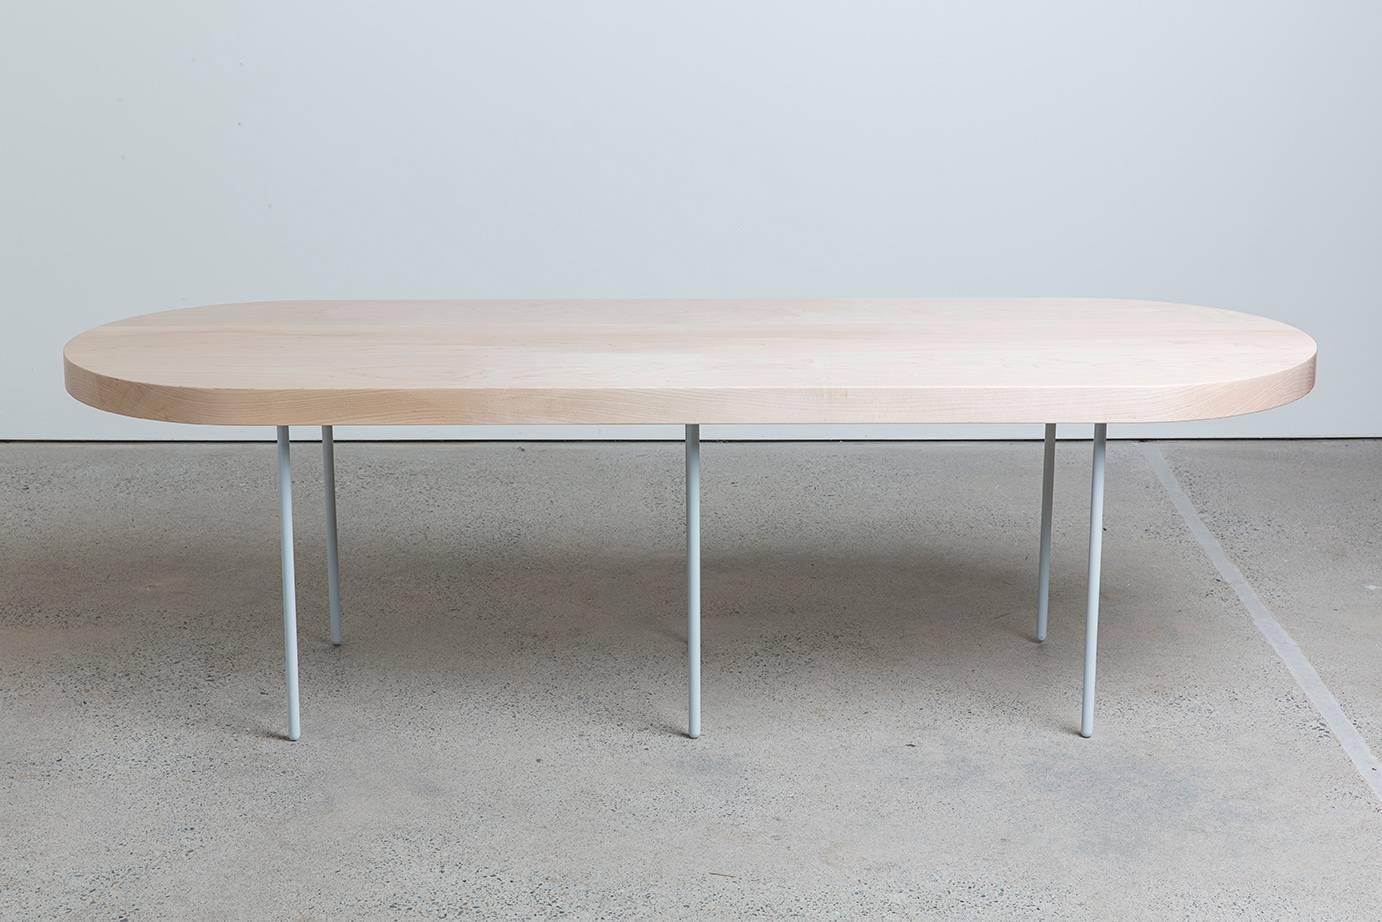 A solid, pill shape, Maple coffee table with gray powder coated spindle steel legs. Handmade to order, this simple and minimal table will resonate well with any environment or situation.

Built in Portland, OR, this table is available in custom